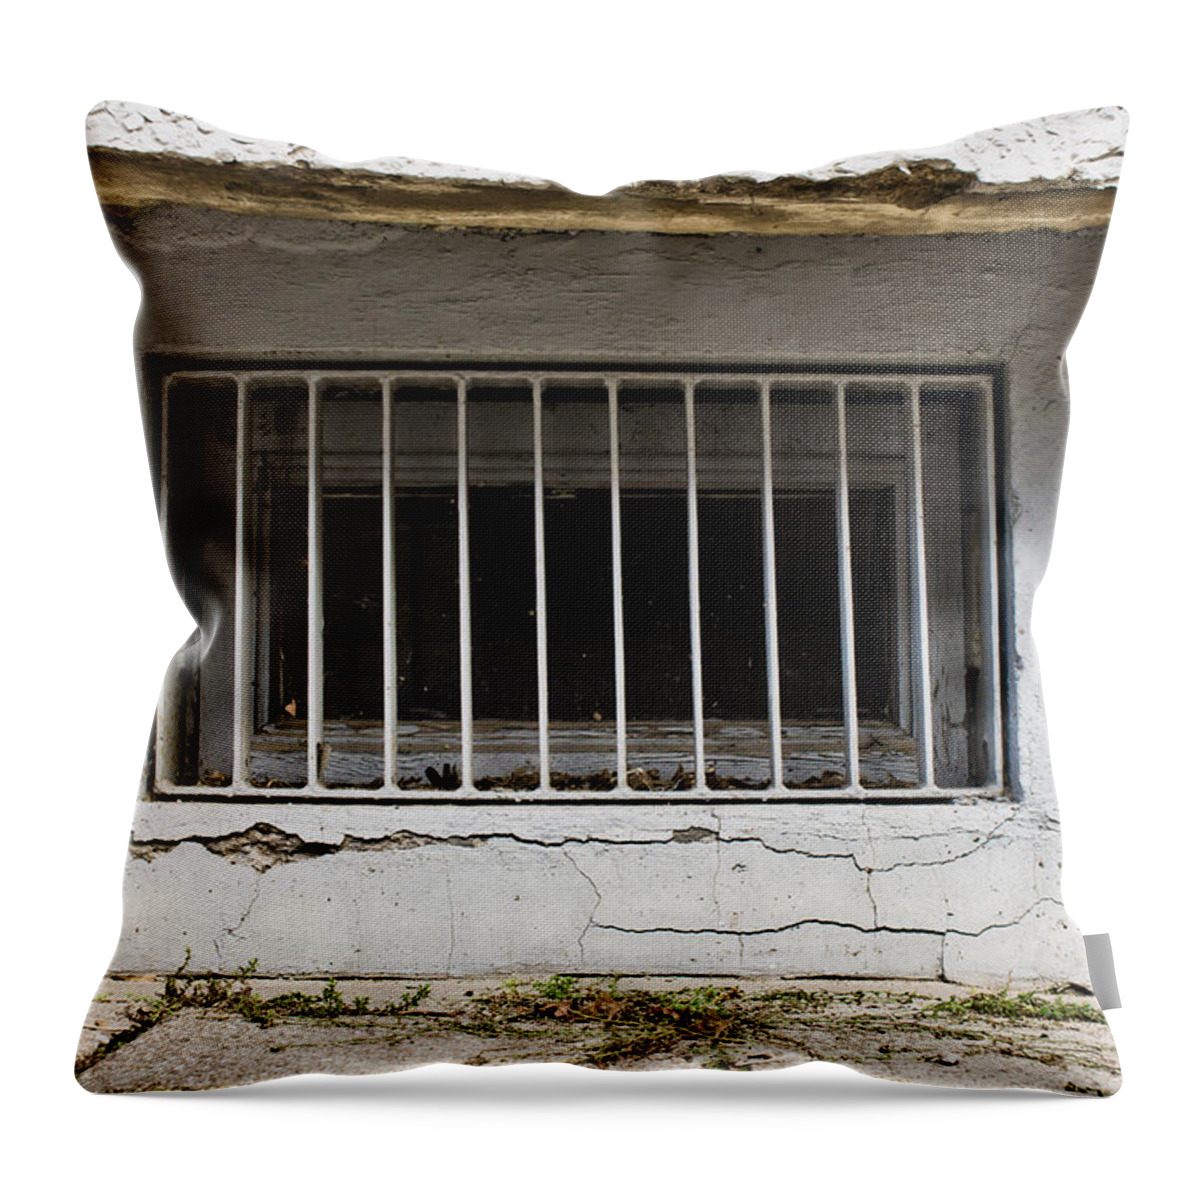 Anti-theft Throw Pillow featuring the photograph Window bars #5 by Tom Gowanlock